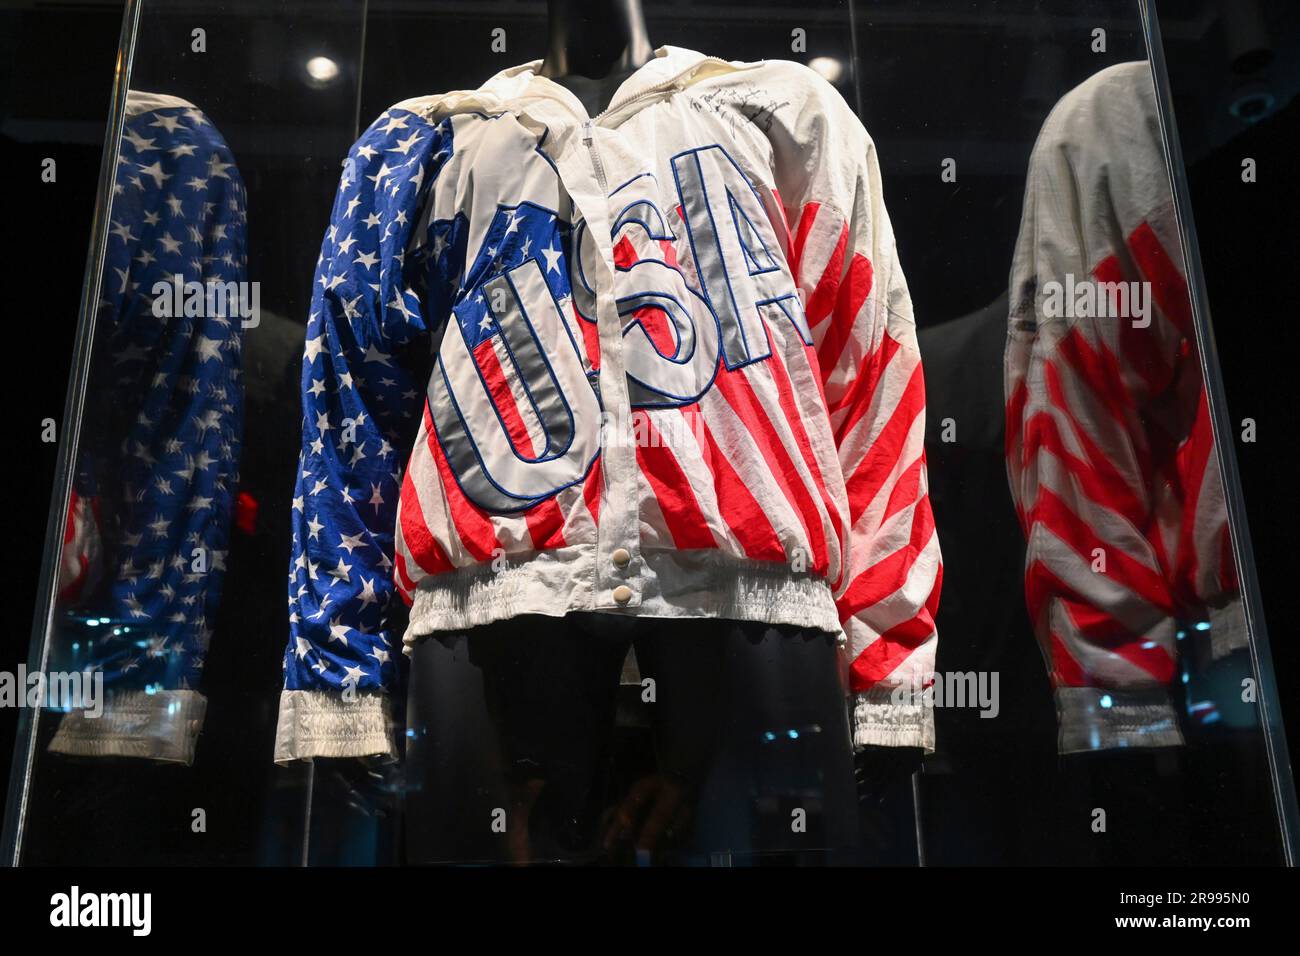 Photo by: NDZ/STAR MAX/IPx 2023 6/24/23 Michael Jordan 1992 Summer Olympics  'Dream Team' Gold Medal Ceremony Worn & Signed Reebok Jacket (estimate $1-3  million USD) on display as part of 'The Dream